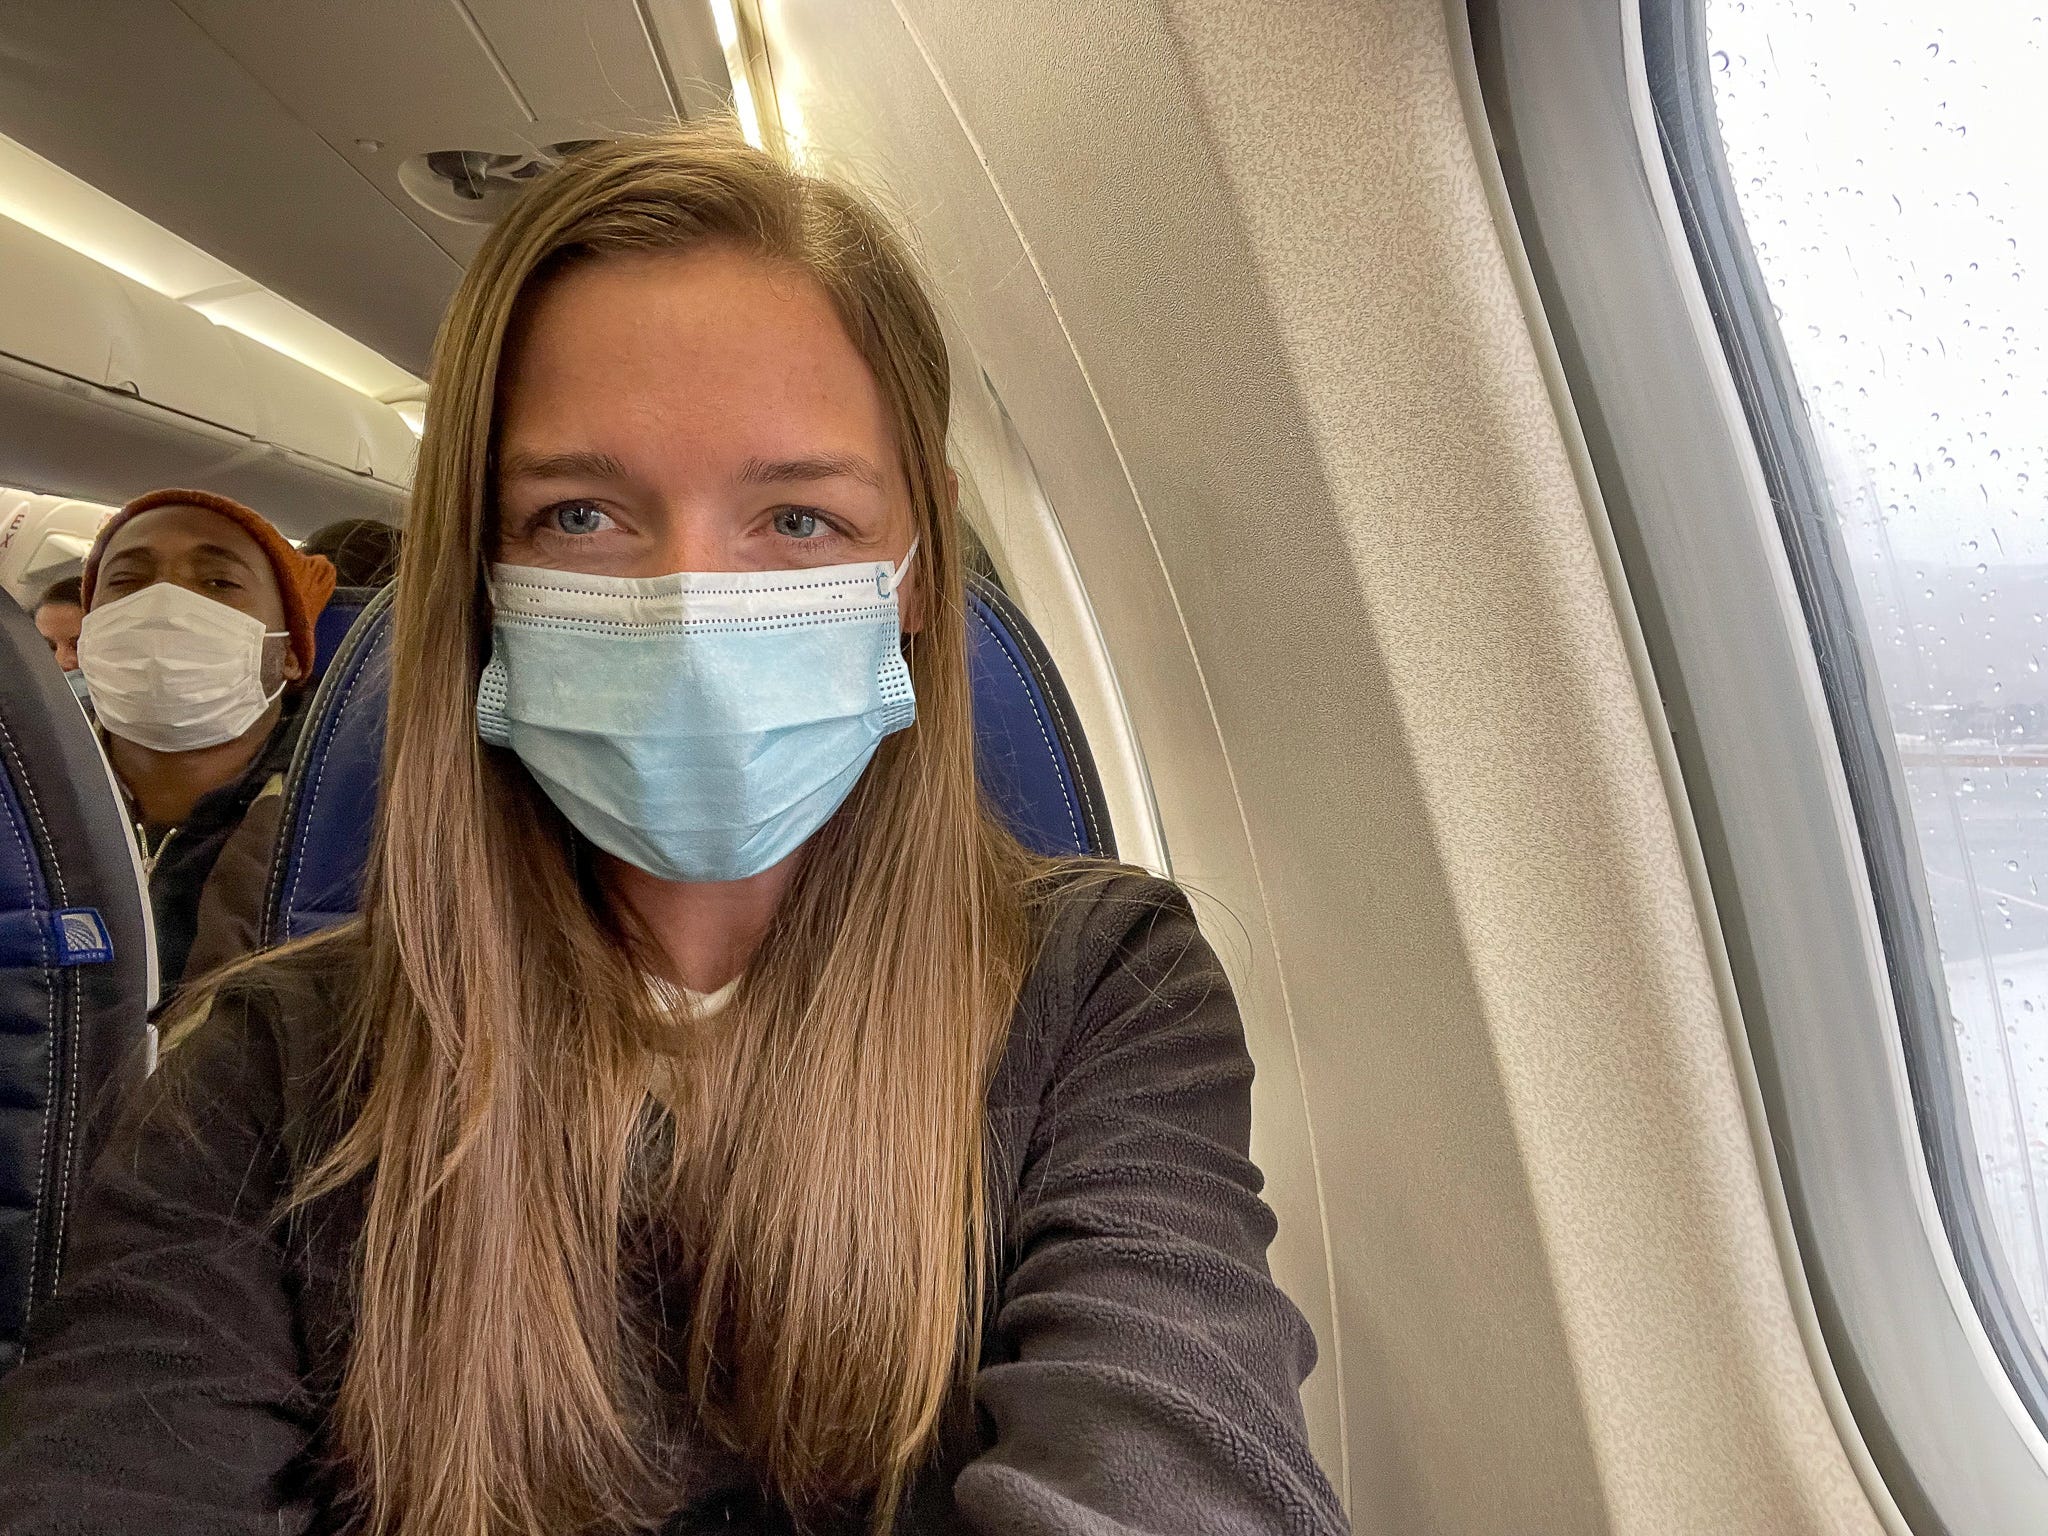 <p>I'm young and able-bodied. And while sitting in economy is never a blast, especially on long-haul flights, I am fortunate that I can. Planes aren't designed for everyone.</p><p>As <a href="https://www.buzzfeednews.com/article/aubreygordon/flying-while-fat">BuzzFeed</a> reported, flying as a plus-sized passenger is both stigmatized and challenging. Some airlines like Southwest at one point had "customer of size" policies that stated passengers "who are unable to lower both armrests when seated should book another seat because of complaints."</p><p>As <a href="https://www.businessinsider.com/plus-size-model-says-qatar-airways-blocked-flight-too-fat-2022-11">Business Insider</a> previously reported, a Qatar Airways passenger said she was denied boarding and asked to buy a first-class ticket because of her size. </p><p>It's not just plus-sized passengers who face flying struggles. Planes are not often a comfortable experience for many people with disabilities. Rebekah Taussig, a wheelchair user, wrote for <a href="https://time.com/6111731/flying-disabled/" rel="noopener">Time</a> that "flying has always felt disempowering." And a <a href="https://disabilityhorizons.com/2021/03/flying-as-a-wheelchair-user-its-time-for-airlines-to-listen-and-make-changes/">survey by Disability Horizons</a> reported that 43% of surveyed wheelchair users who've attempted to fly now avoid it. </p><p>Flying — especially in economy class — isn't something everyone has the privilege to do. I'm fortunate that I can fit into and relax in an economy seat on a long-haul flight. For me, wanting the luxury of a business-class seat doesn't seem necessary at this point in my life. </p>